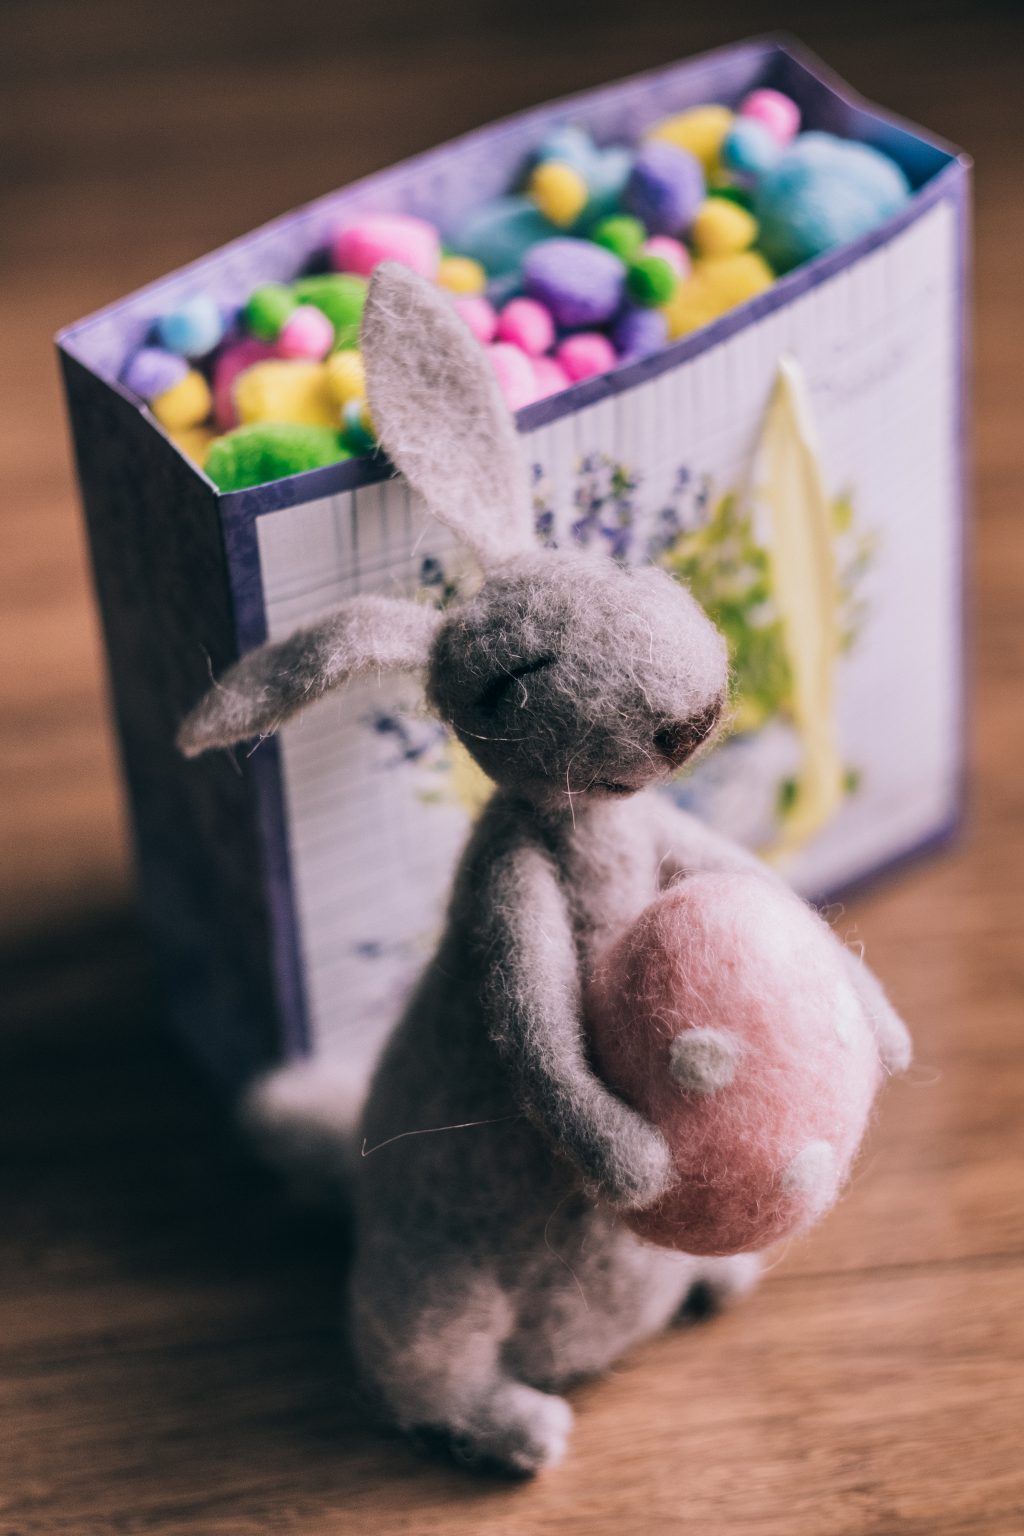 Easter bunny gift 2 - free stock photo